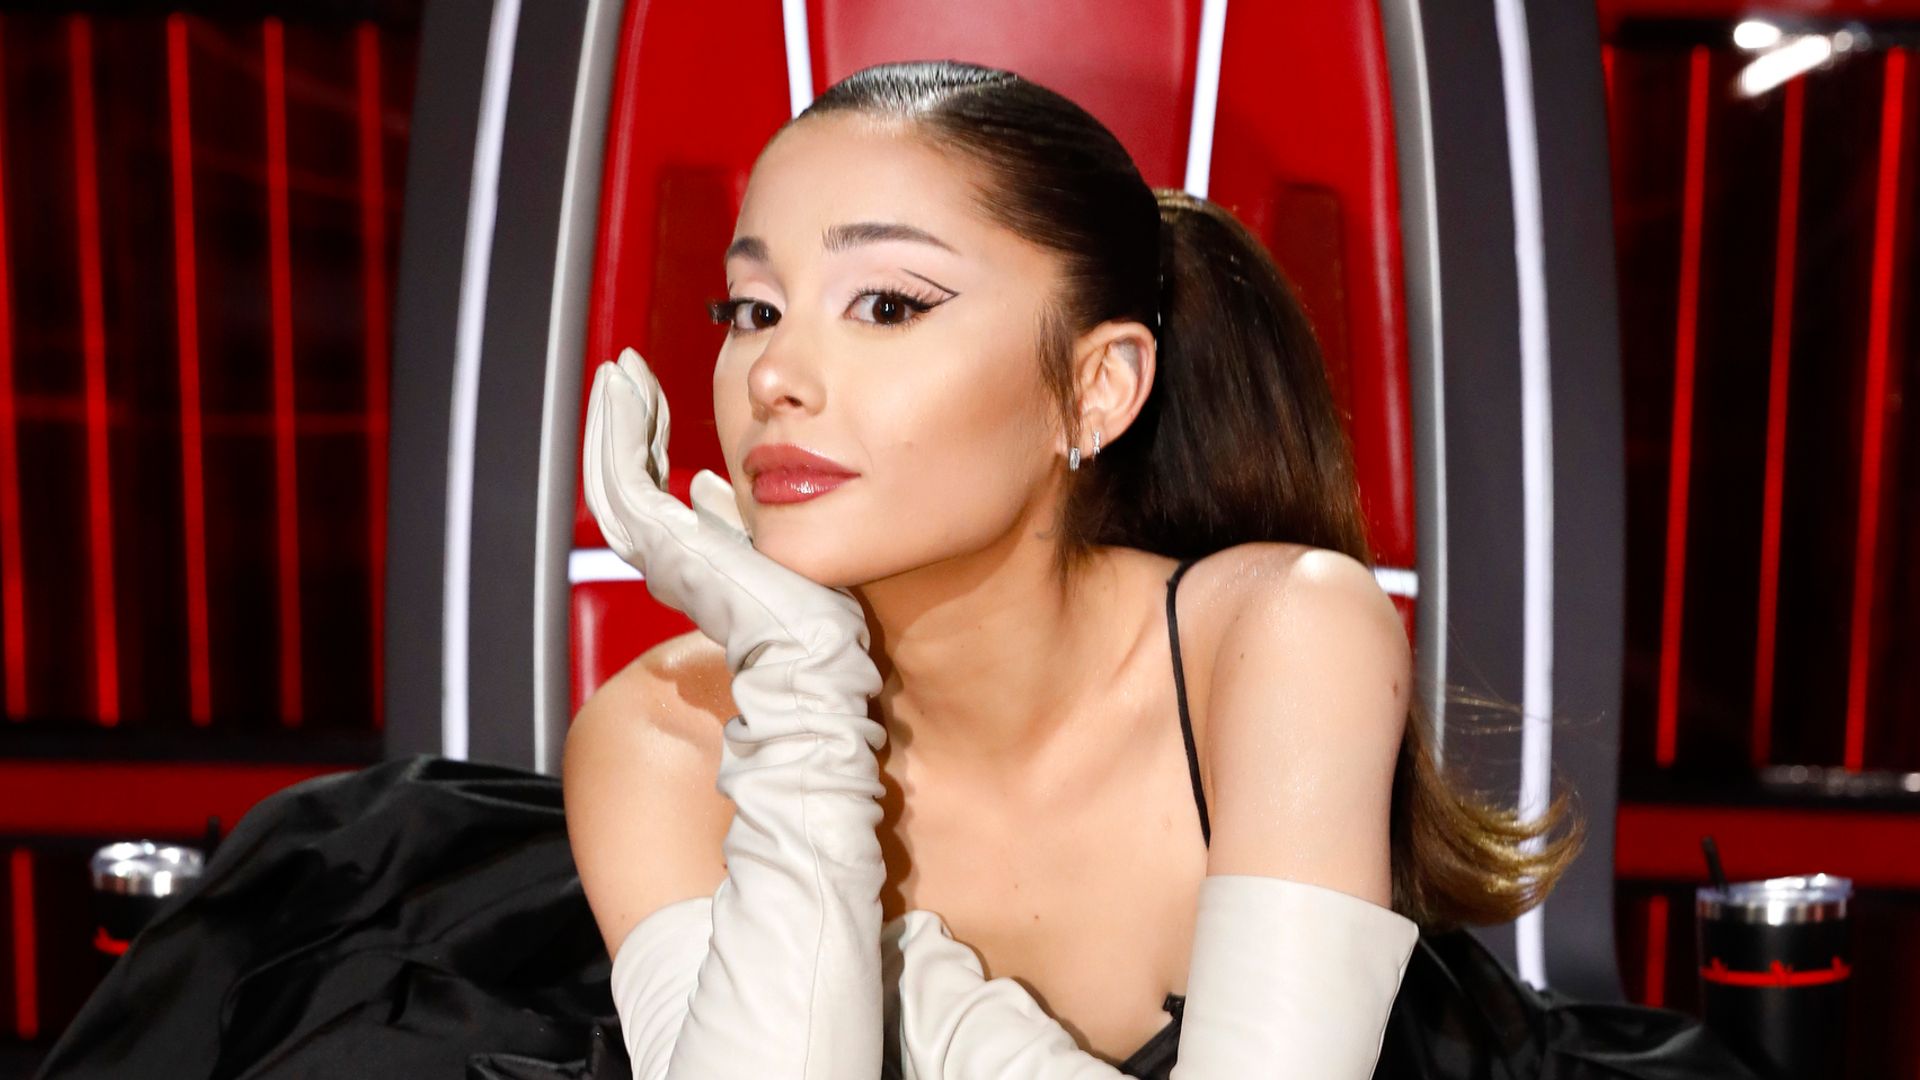 THE VOICE -- "Live Top 10 Performances" Episode 2117A -- Pictured: Ariana Grande